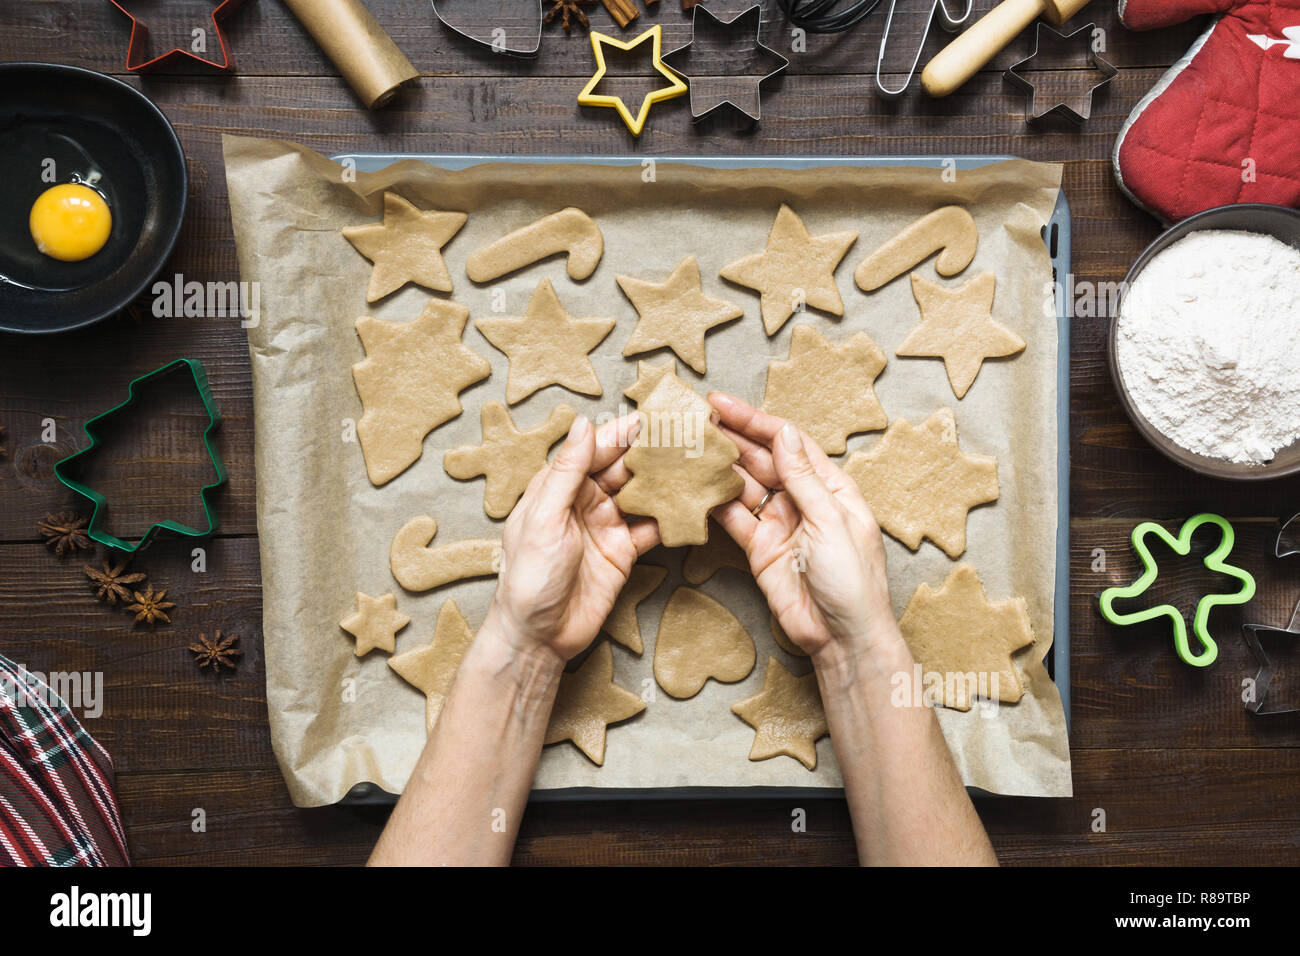 Homemade christmas cookies on parchment. Woman rolls dough. Xmas. The process of baking homemade cookies. Stock Photo